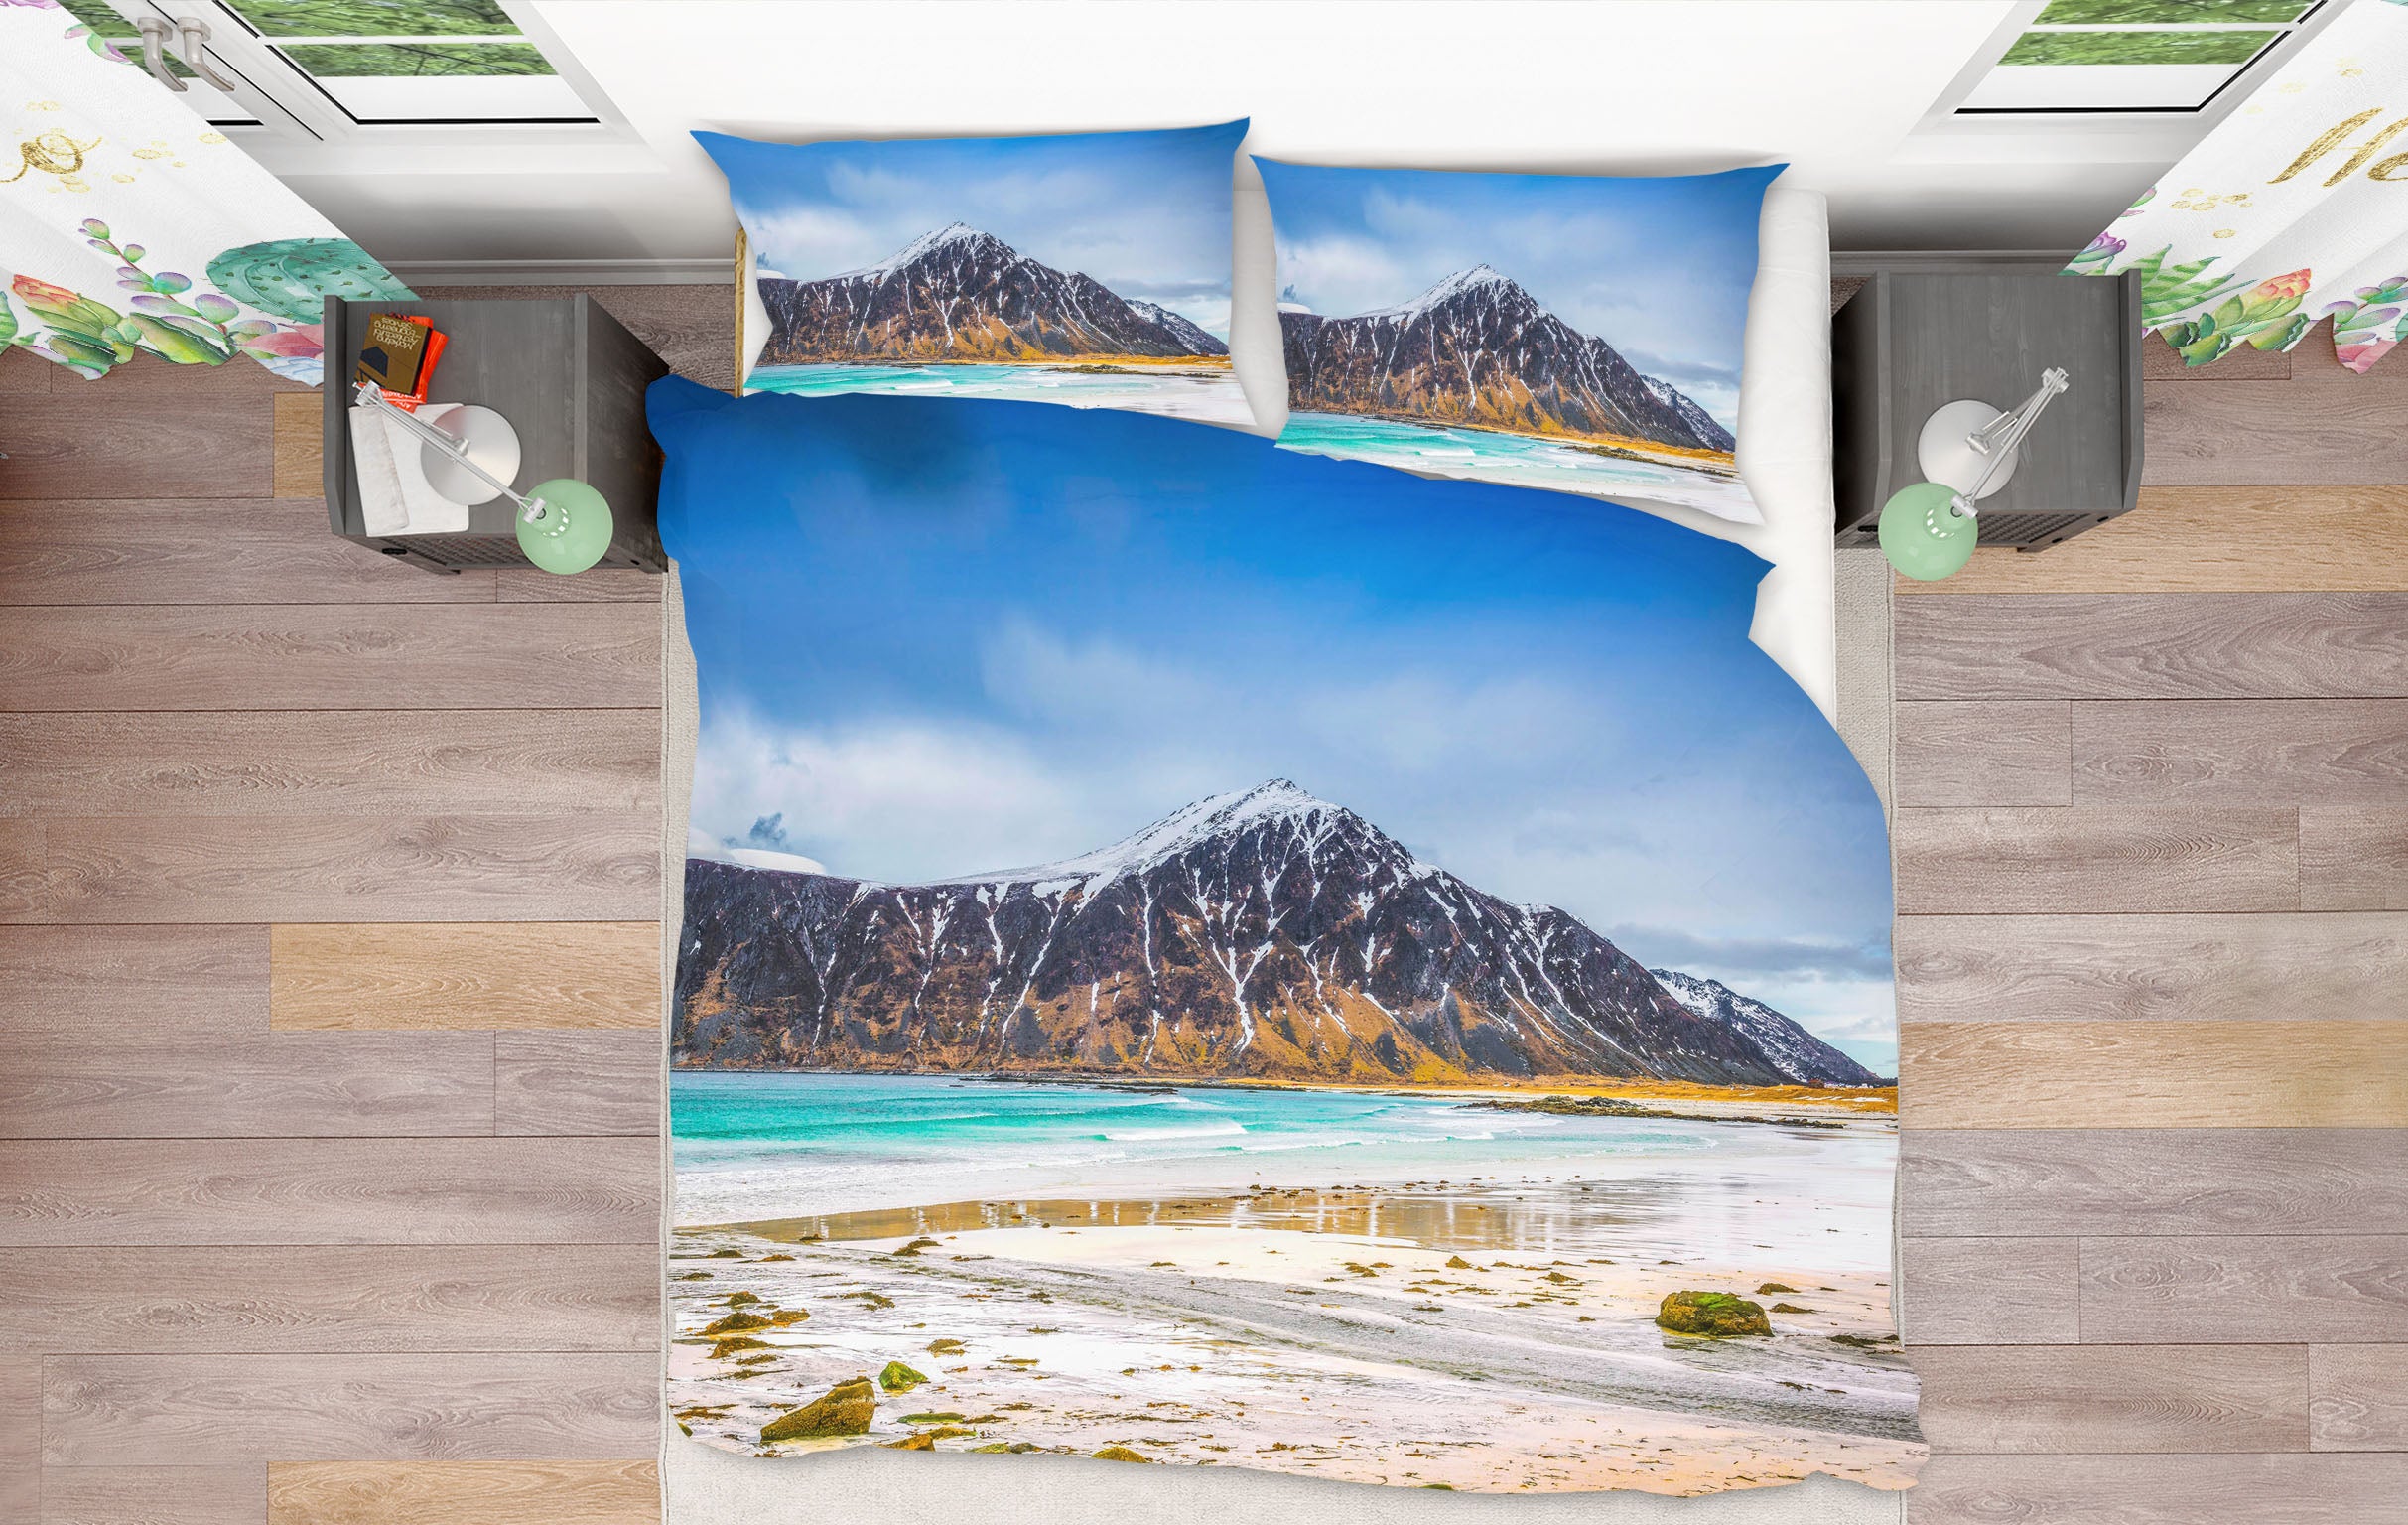 3D Mountain Stones 094 Marco Carmassi Bedding Bed Pillowcases Quilt